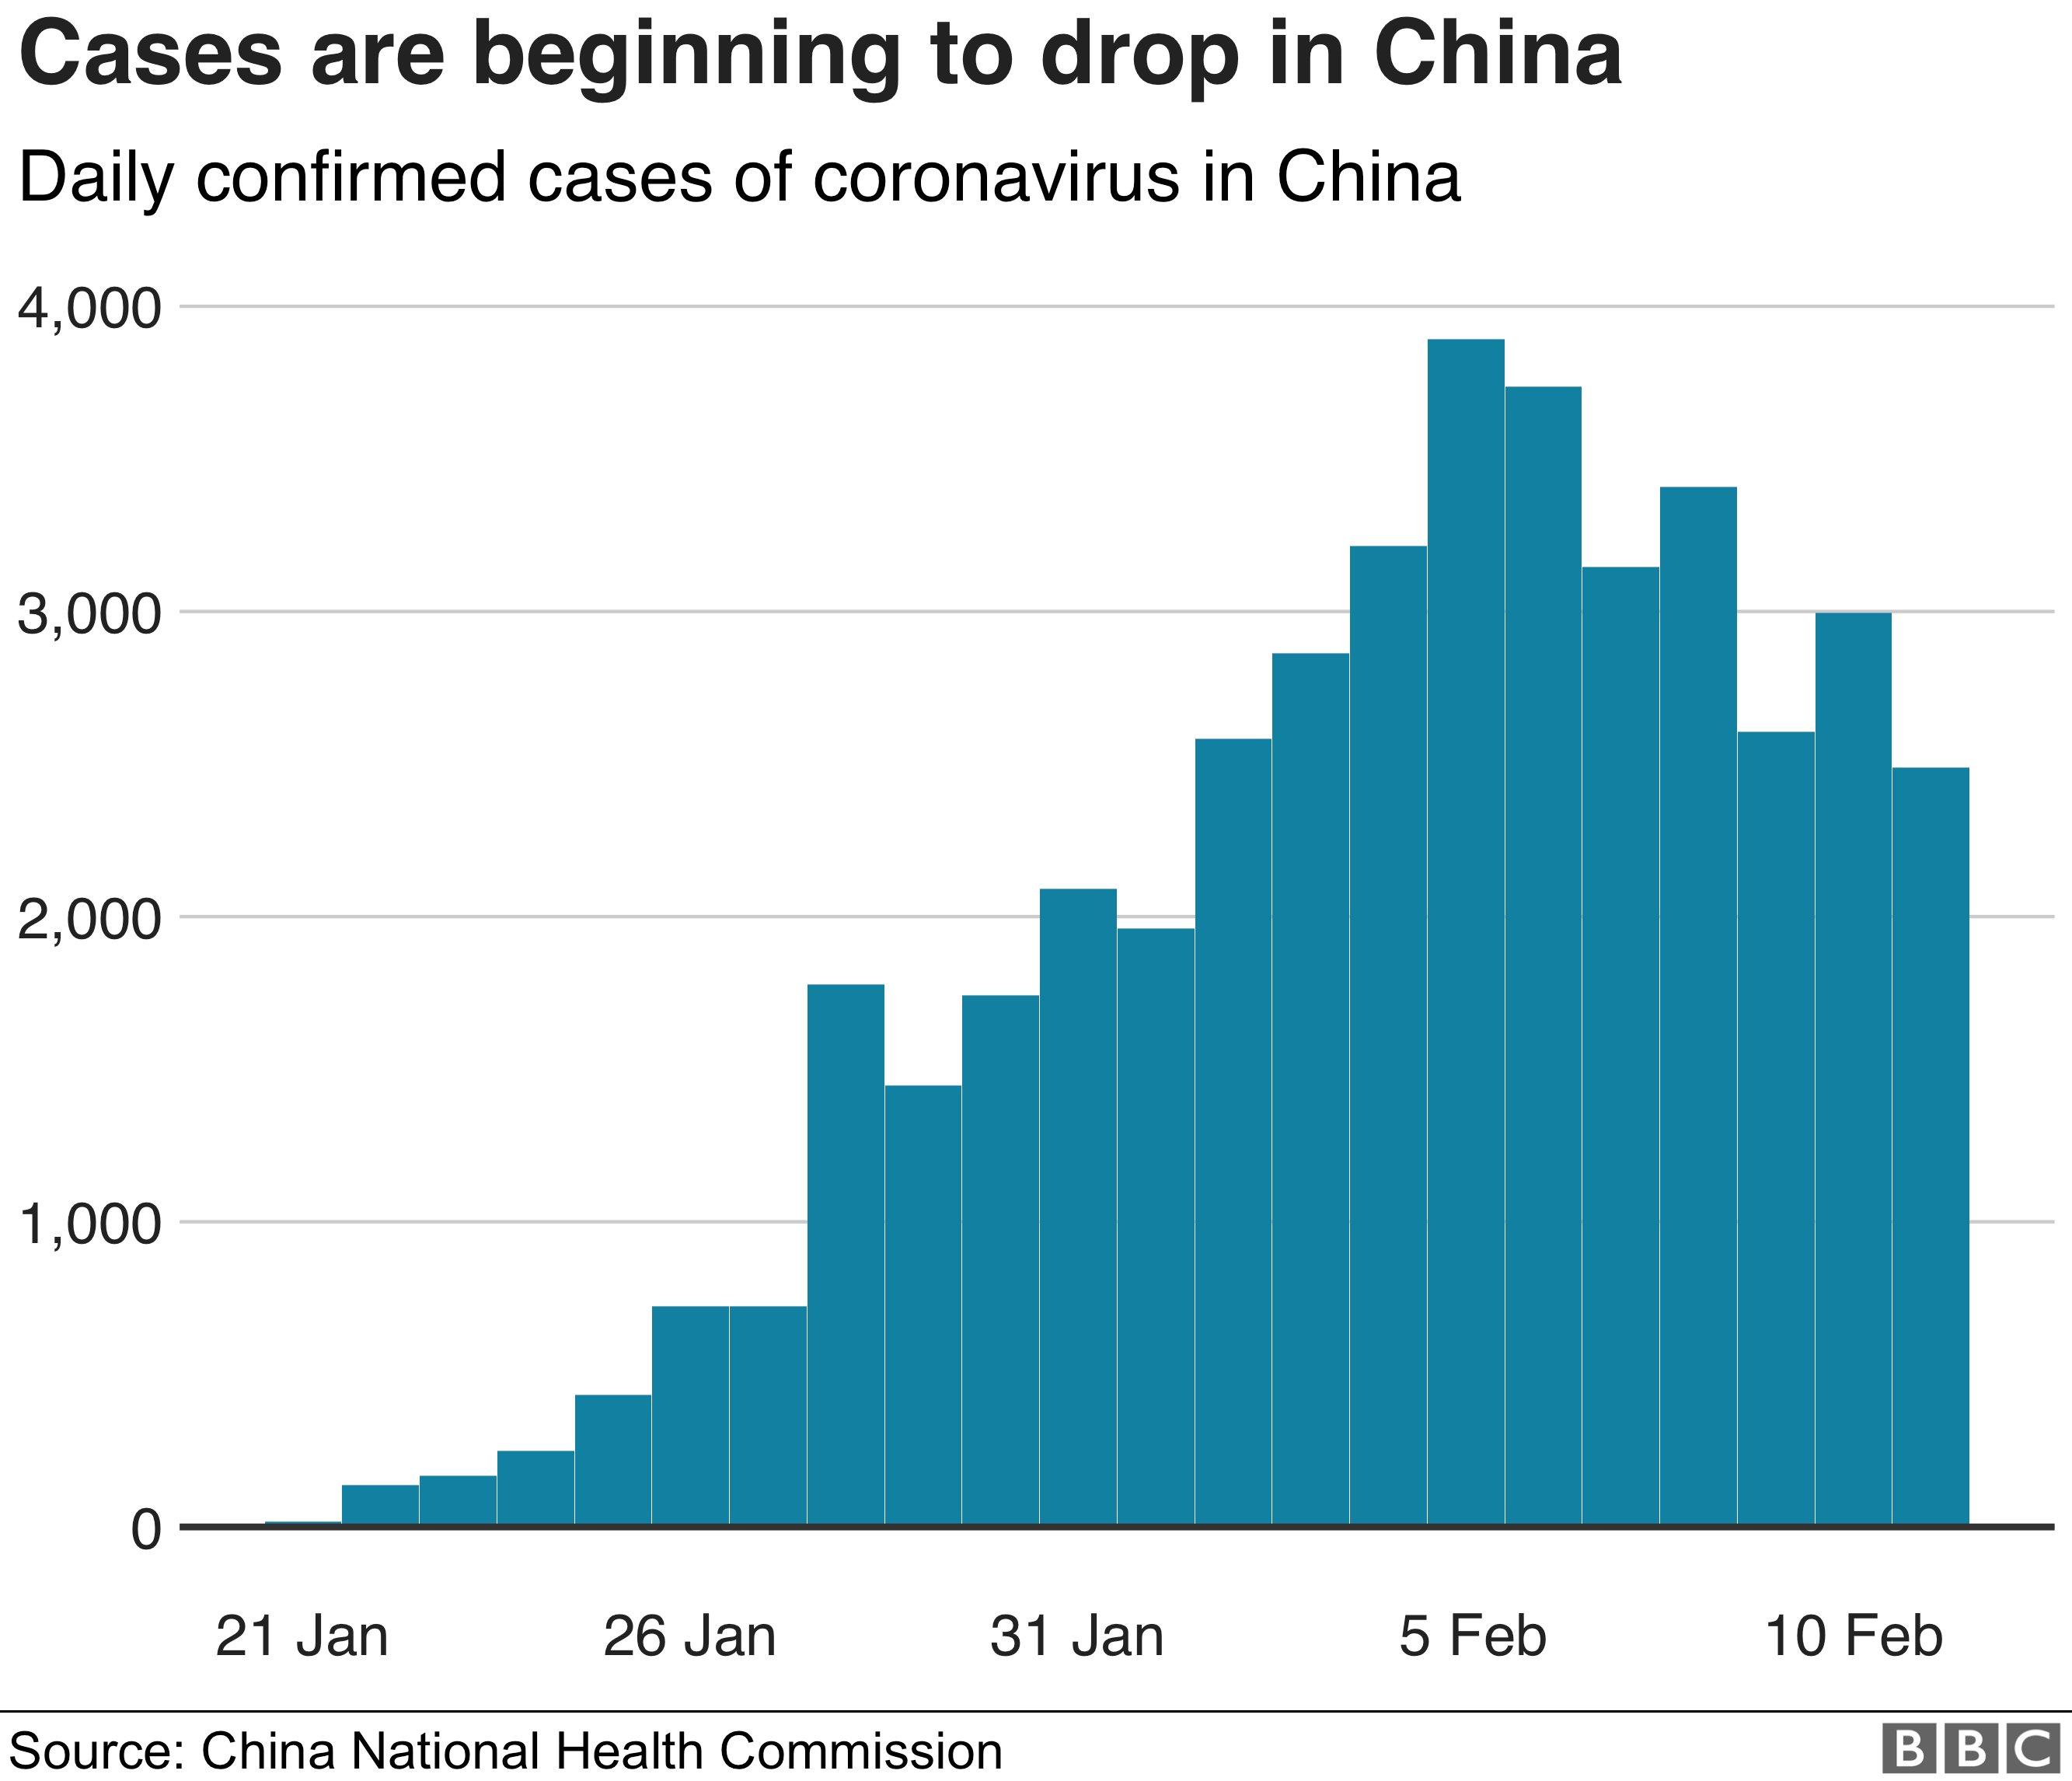 Chart showing how daily confirmed cases of coronavirus in China are beginning to drop from a peak on 5 Feb